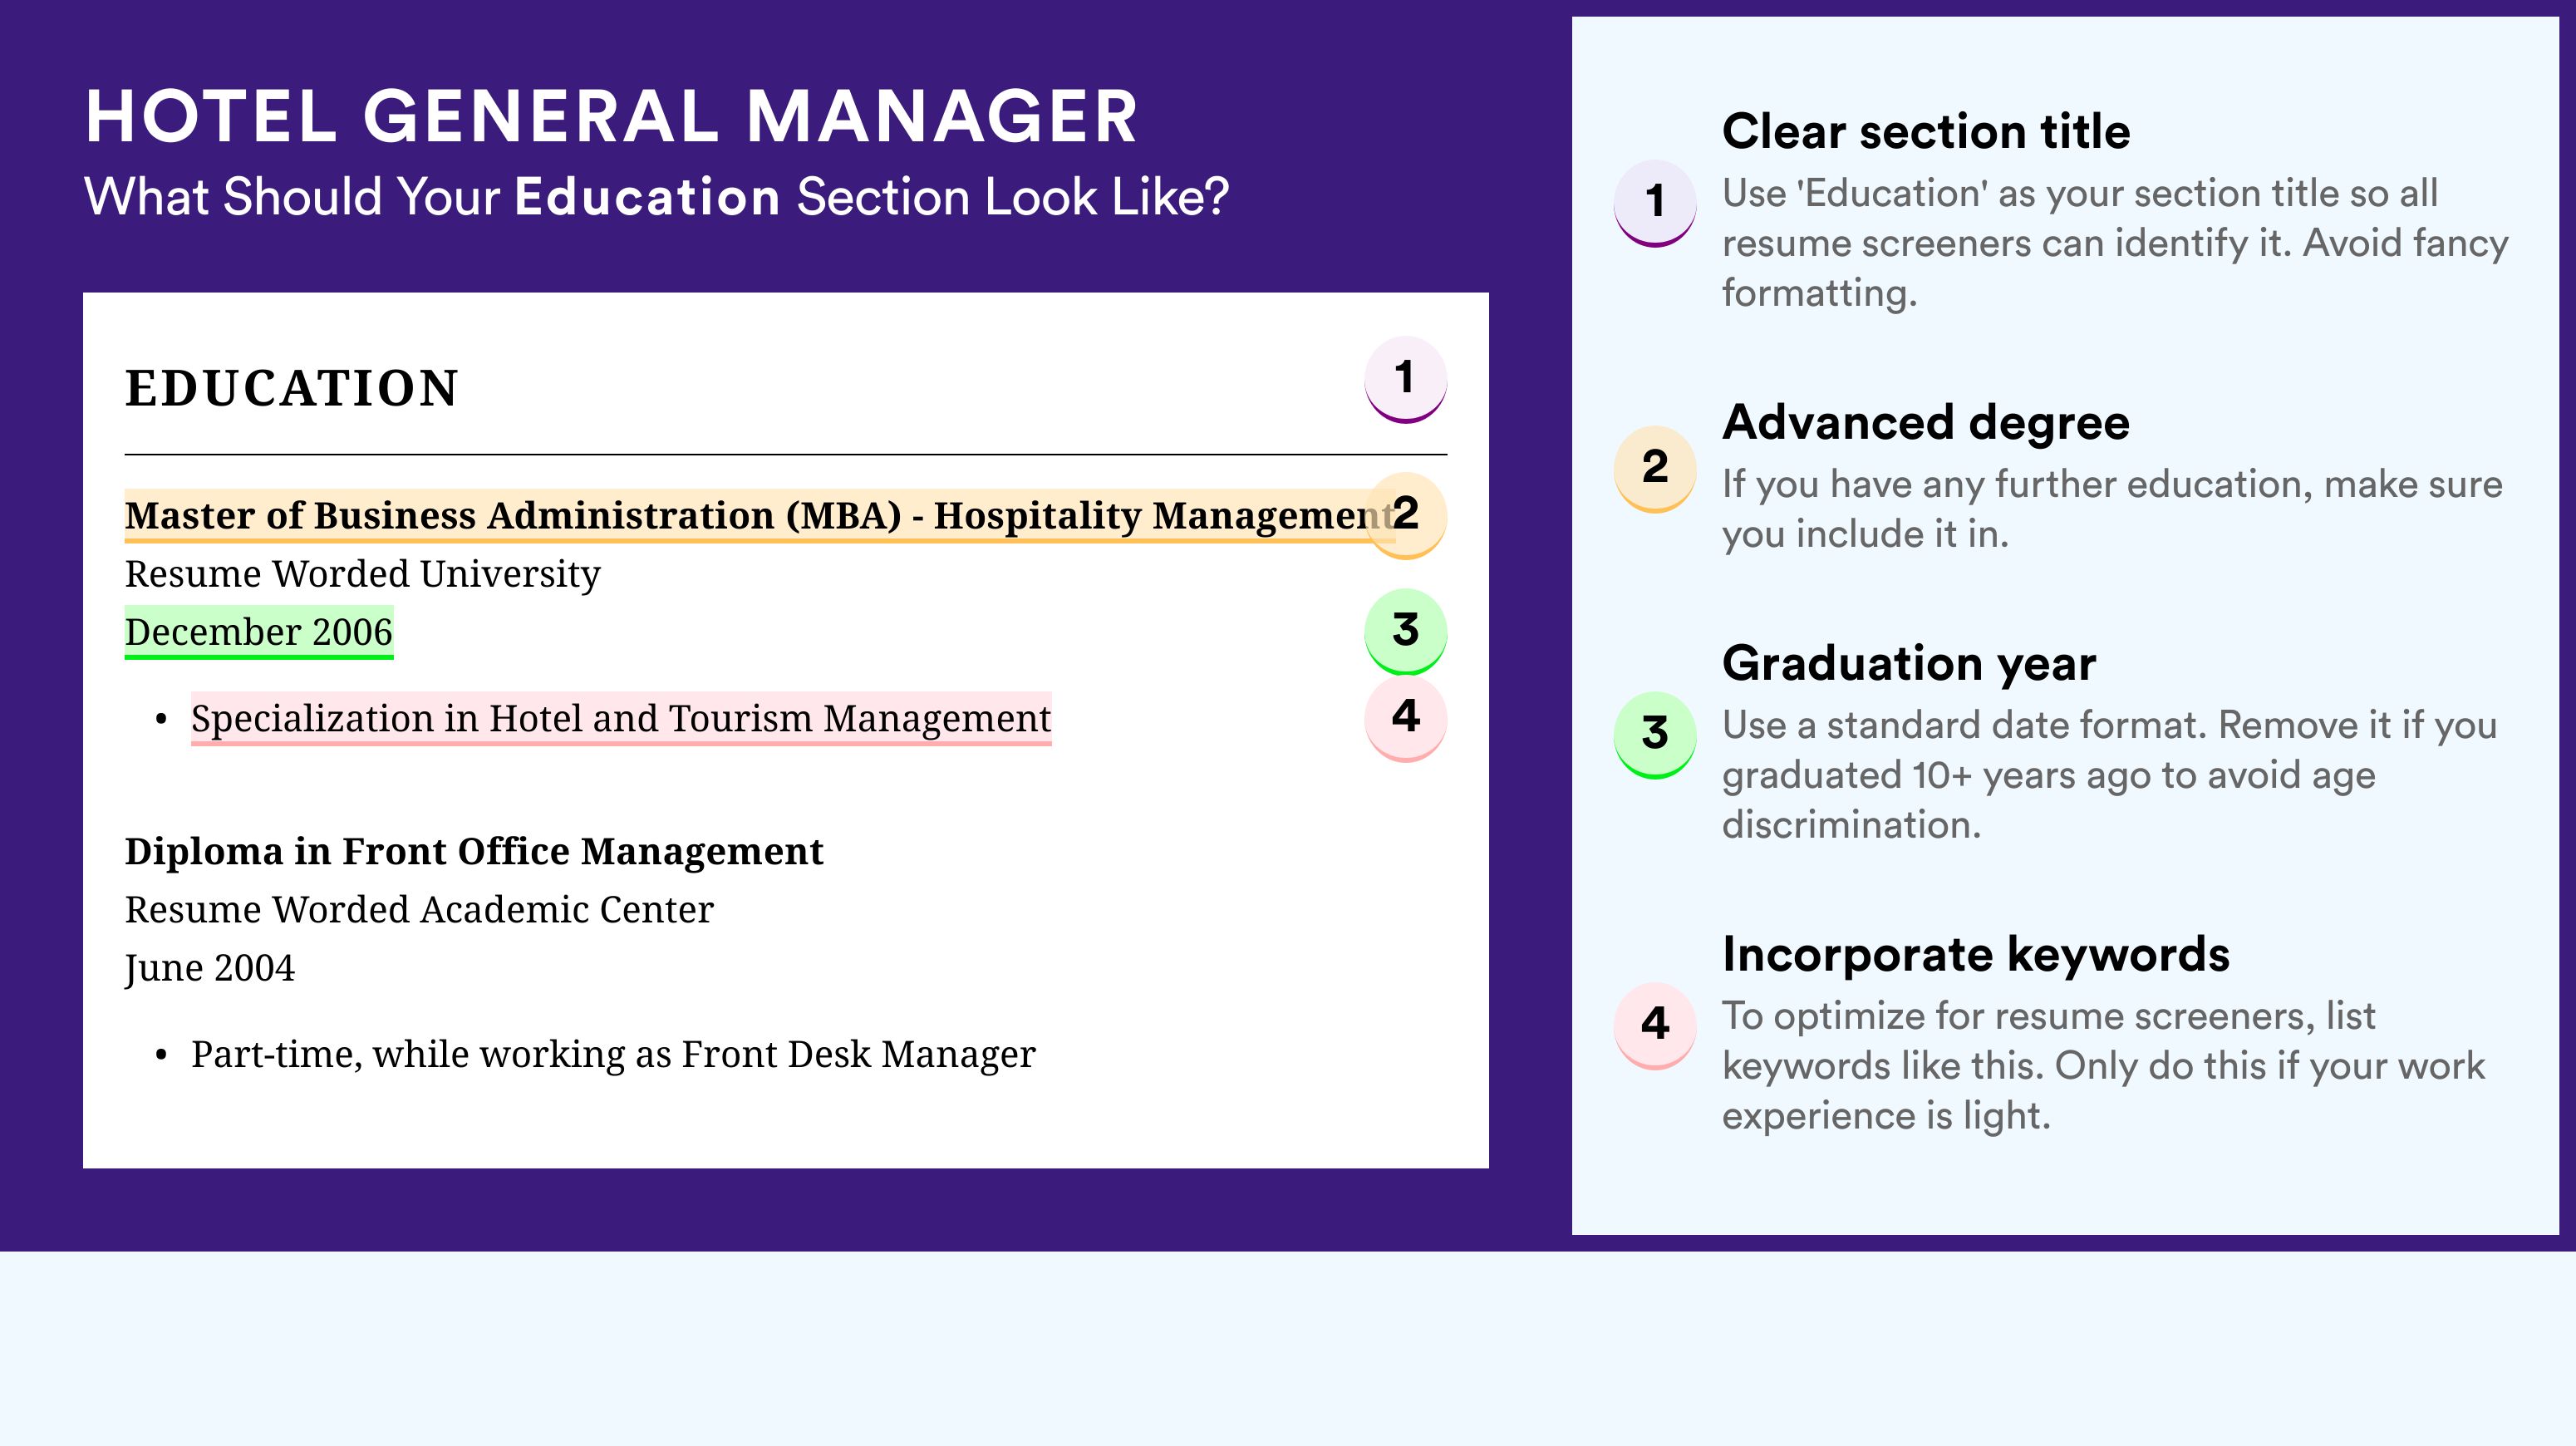 How To Write An Education Section - Hotel General Manager Roles